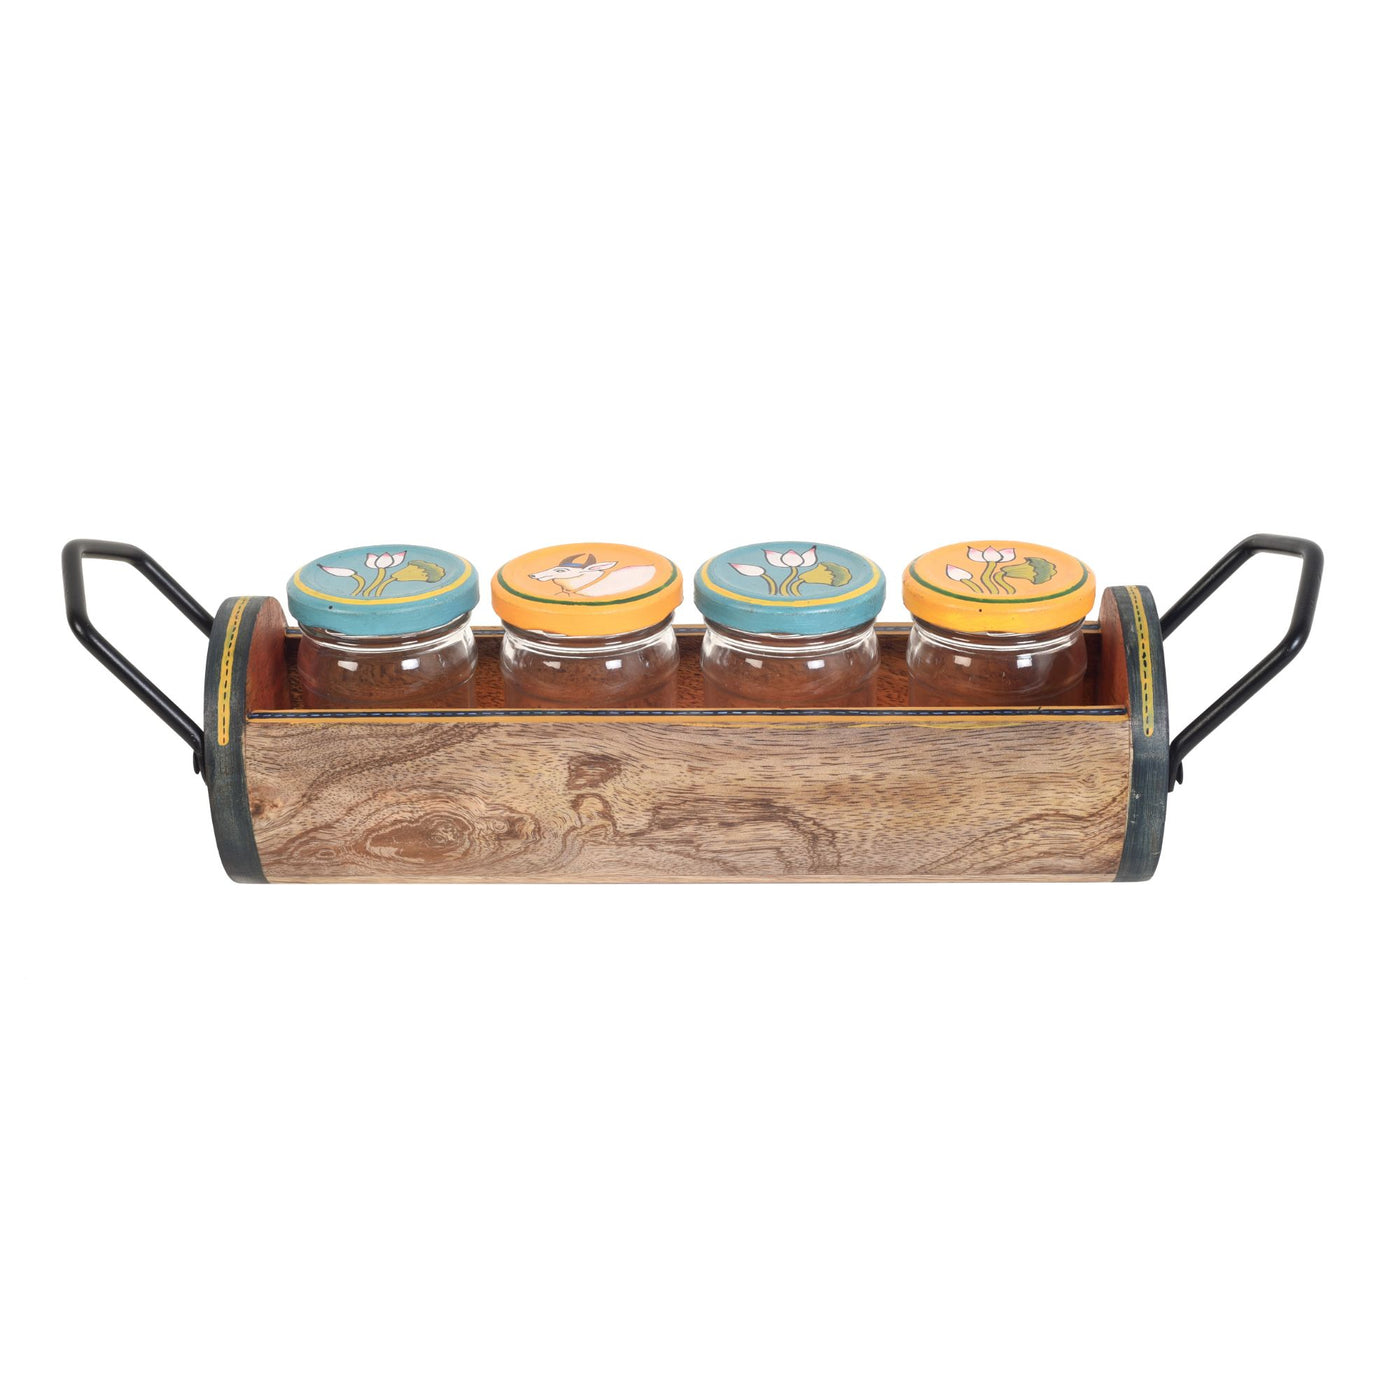 Pichhwai Art Pickle Serving Jars and Tray - Dining & Kitchen - 2